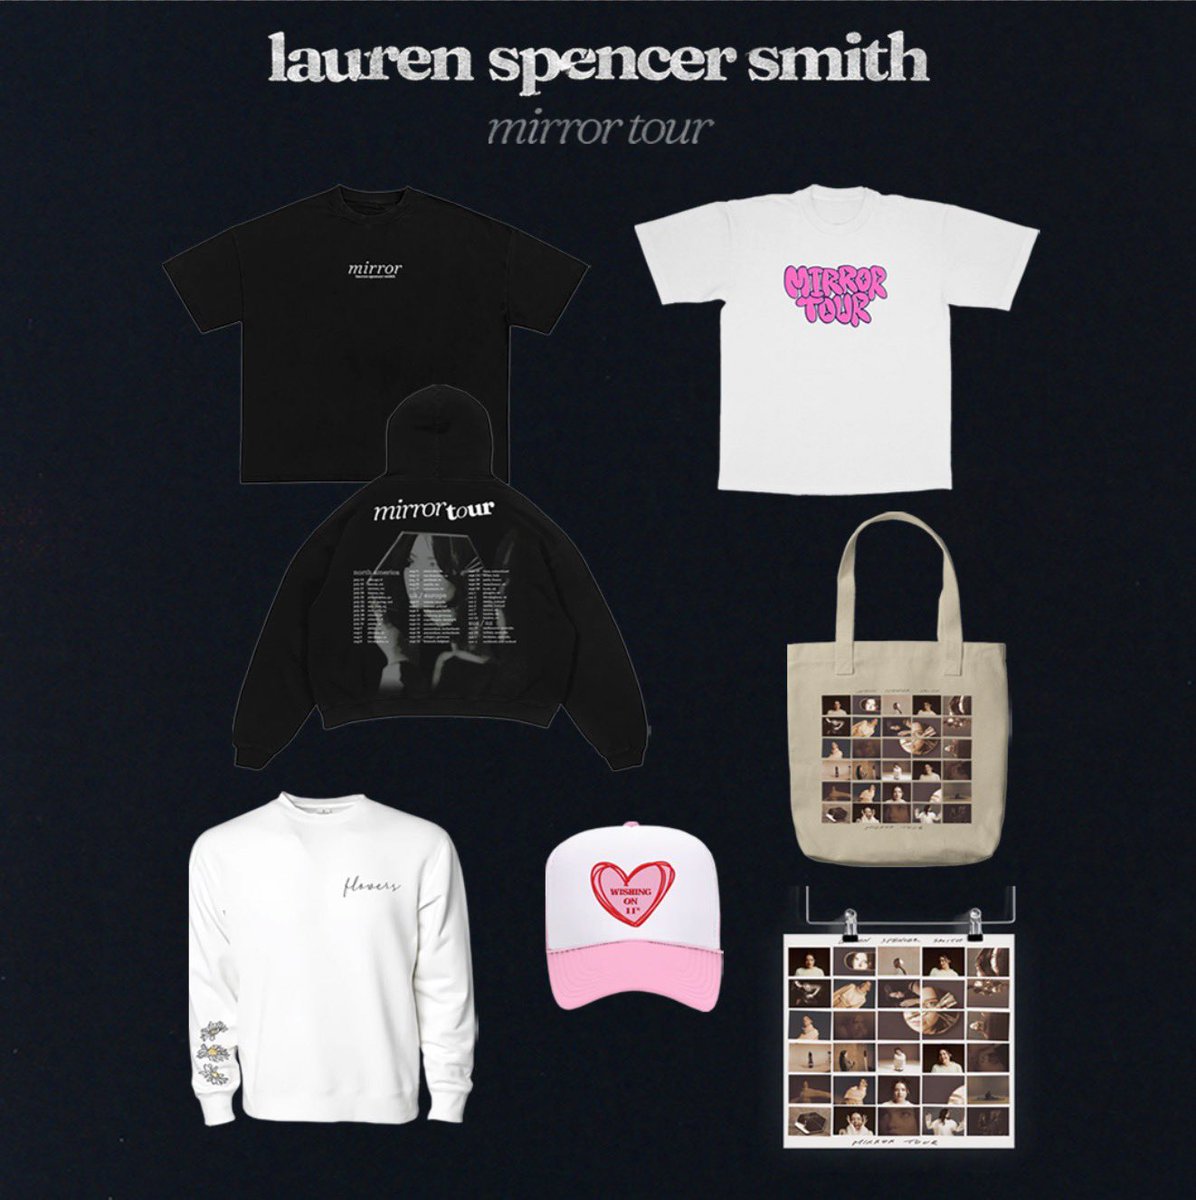 AUSTRALIA ❤️ ily guys sorry this took a min BUT 2023 MIRROR TOUR MERCH IS AVAIL NOW HERE ❤️❤️ laurenspencersmith.bandtshirts.com.au